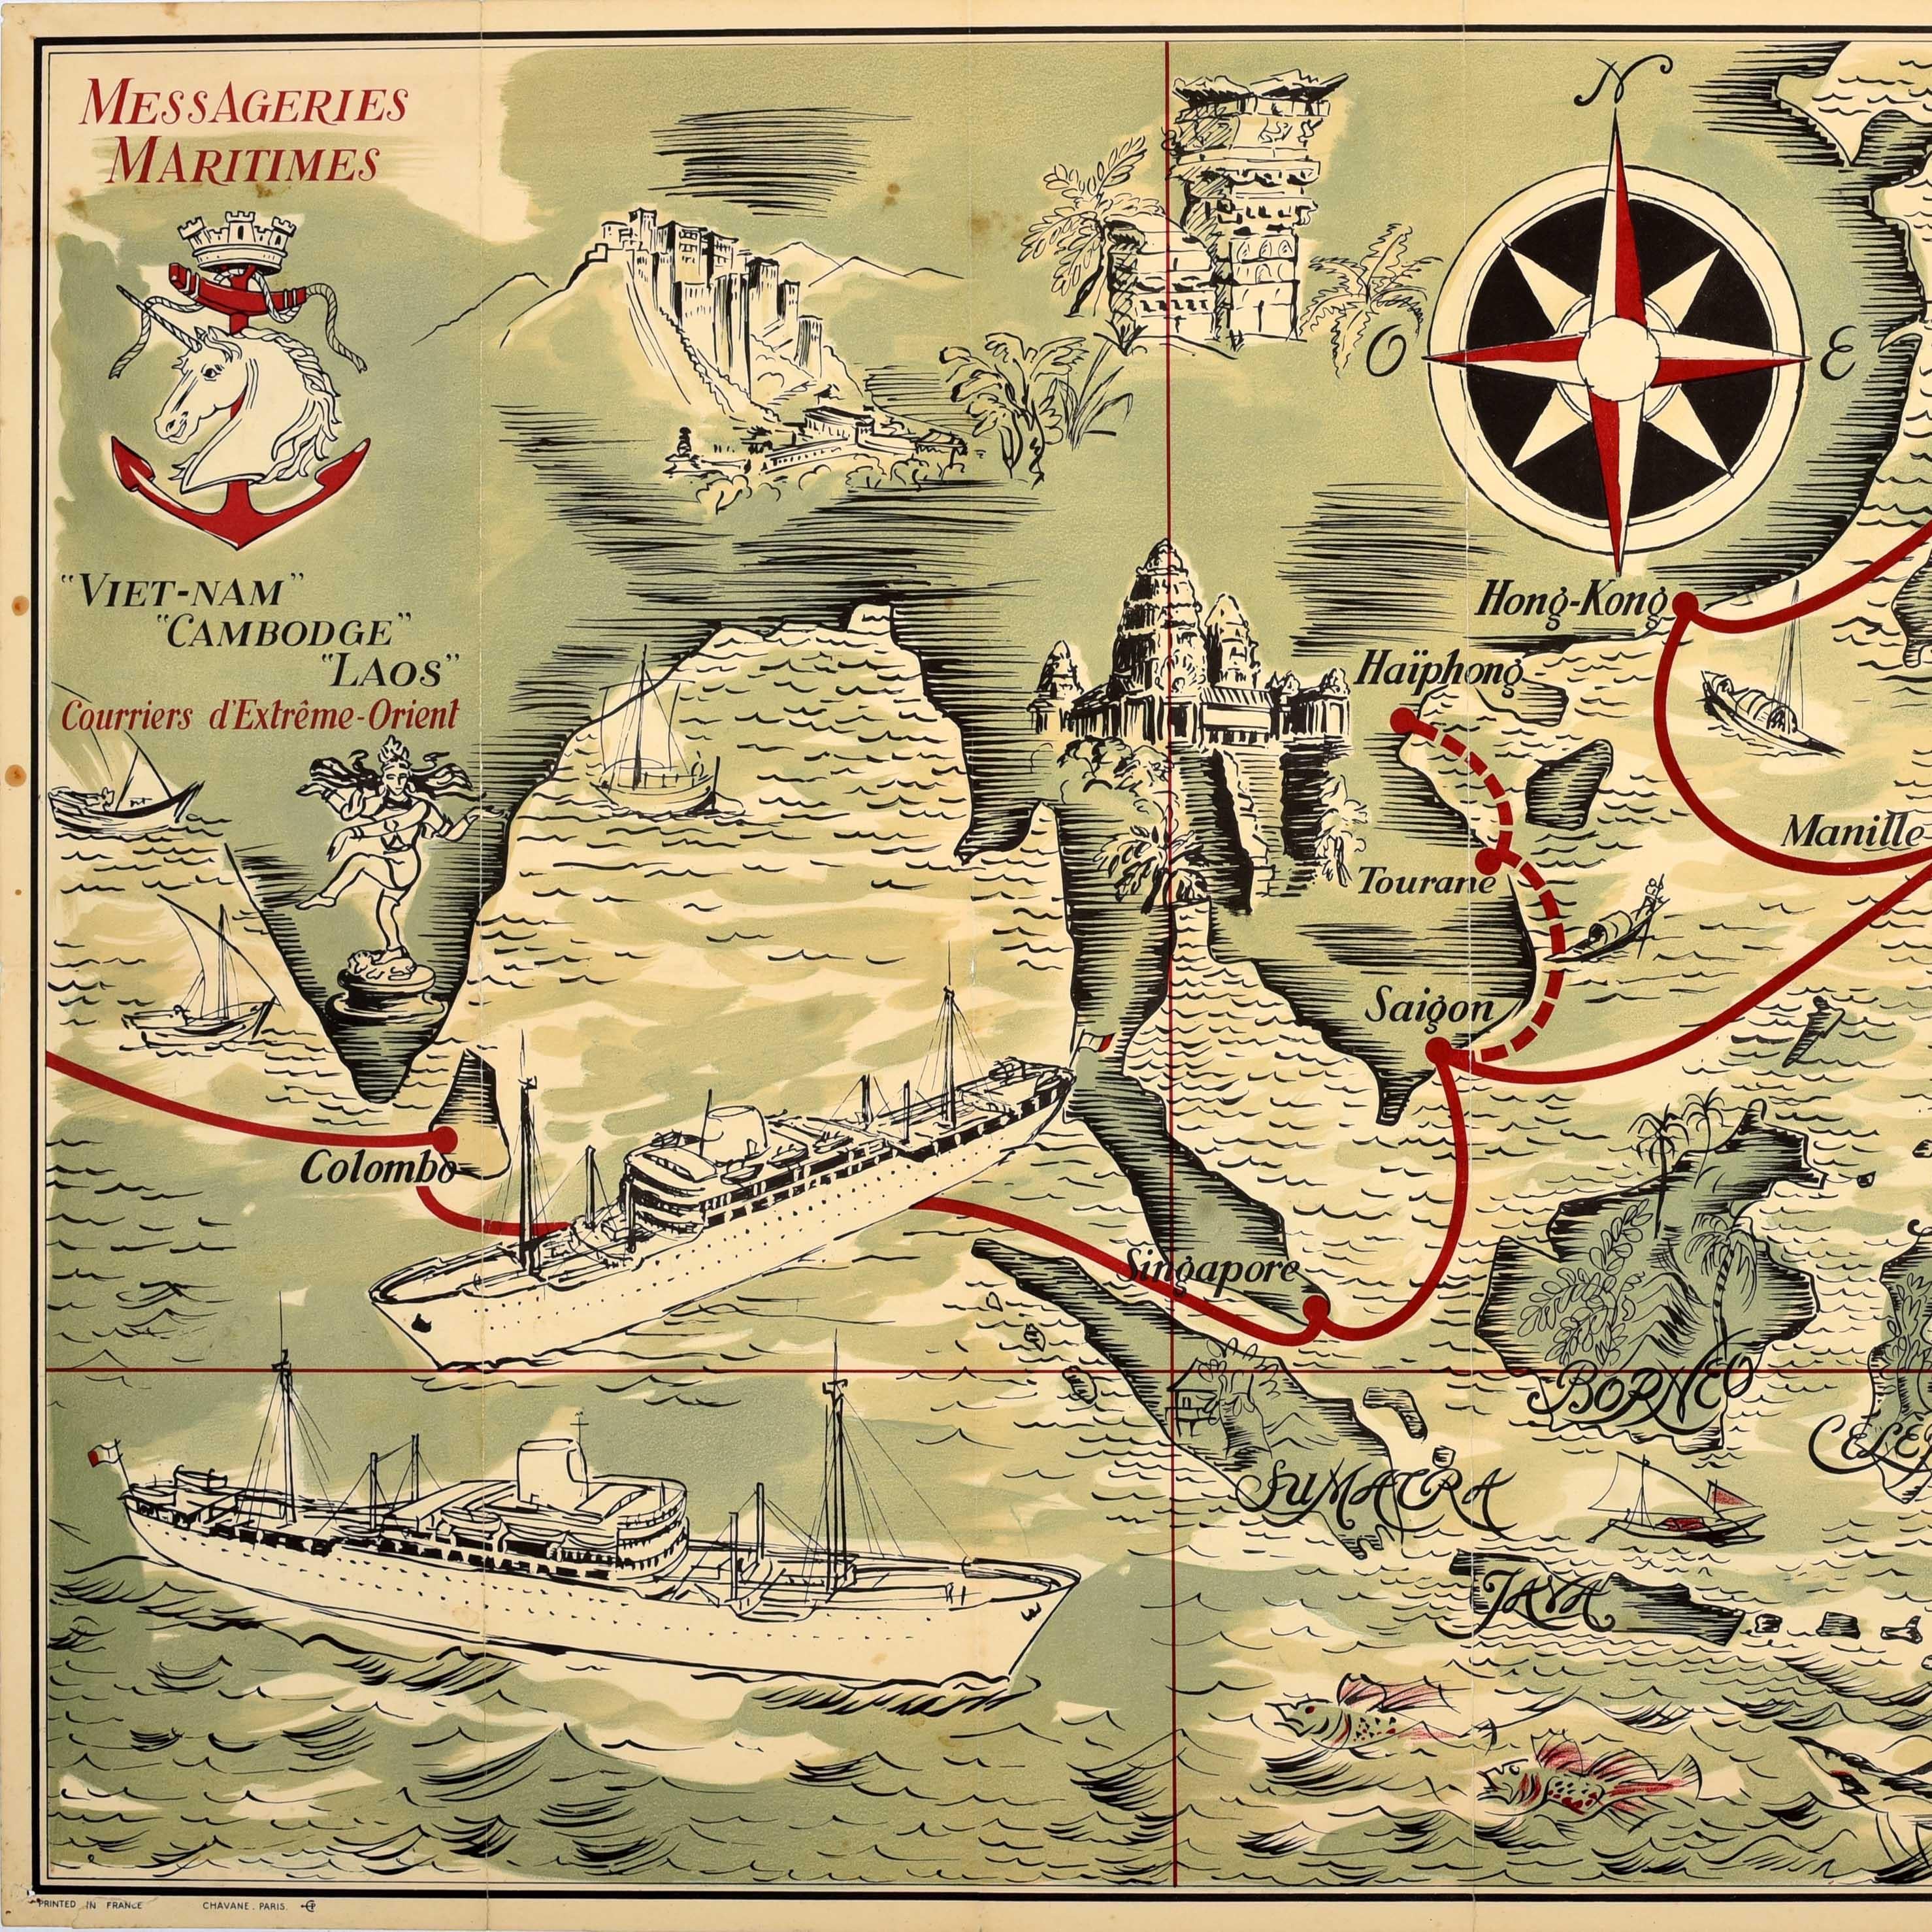 French Original Vintage Advertising Poster Messageries Maritimes Far East Map H Baille For Sale